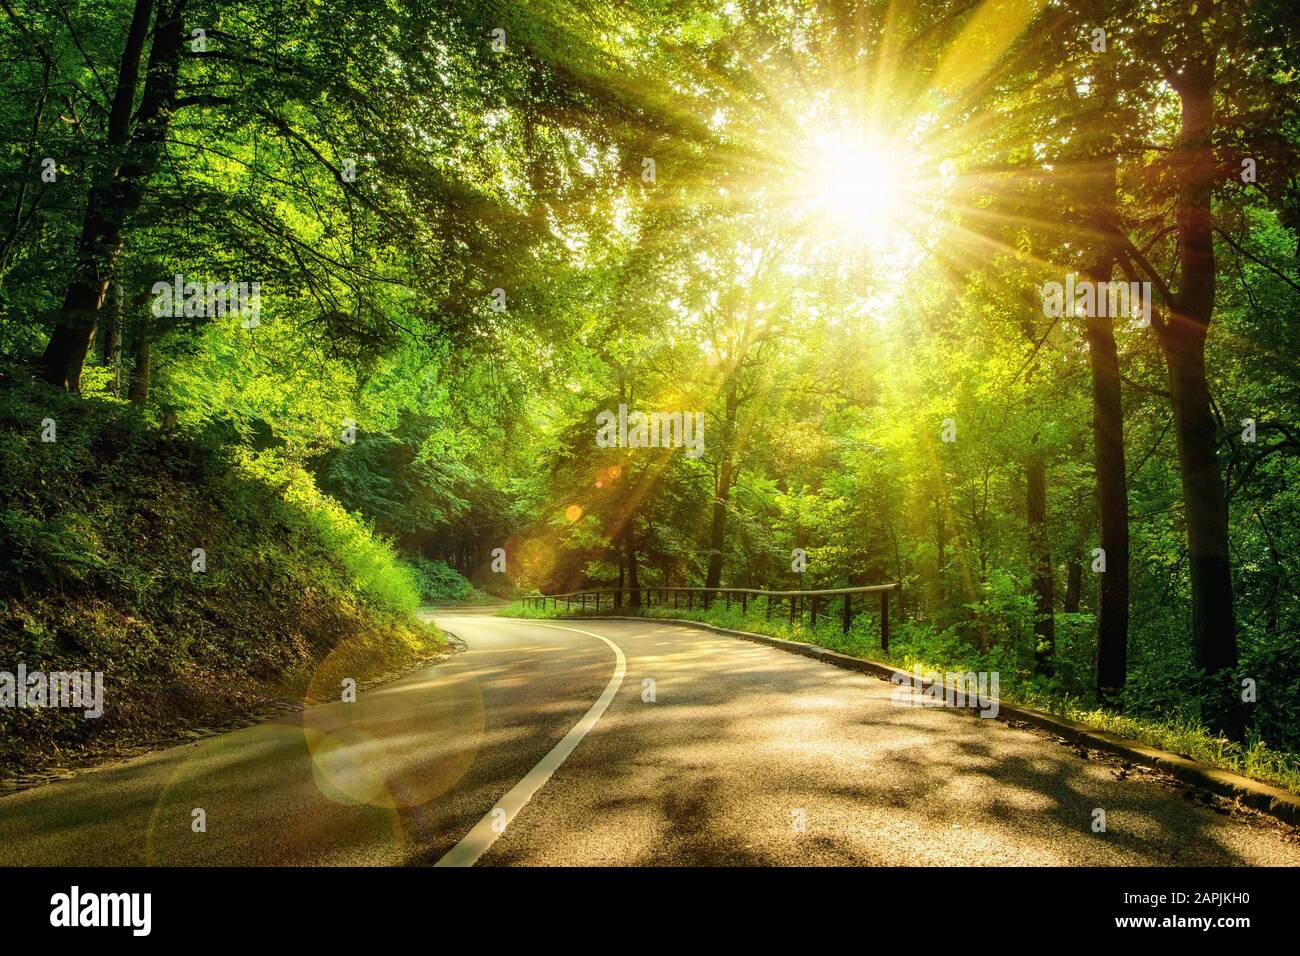 Landscape shot with the gold sun rays illumining a scenic road in a beautiful green forest, with light effects and shadows Stock Photo